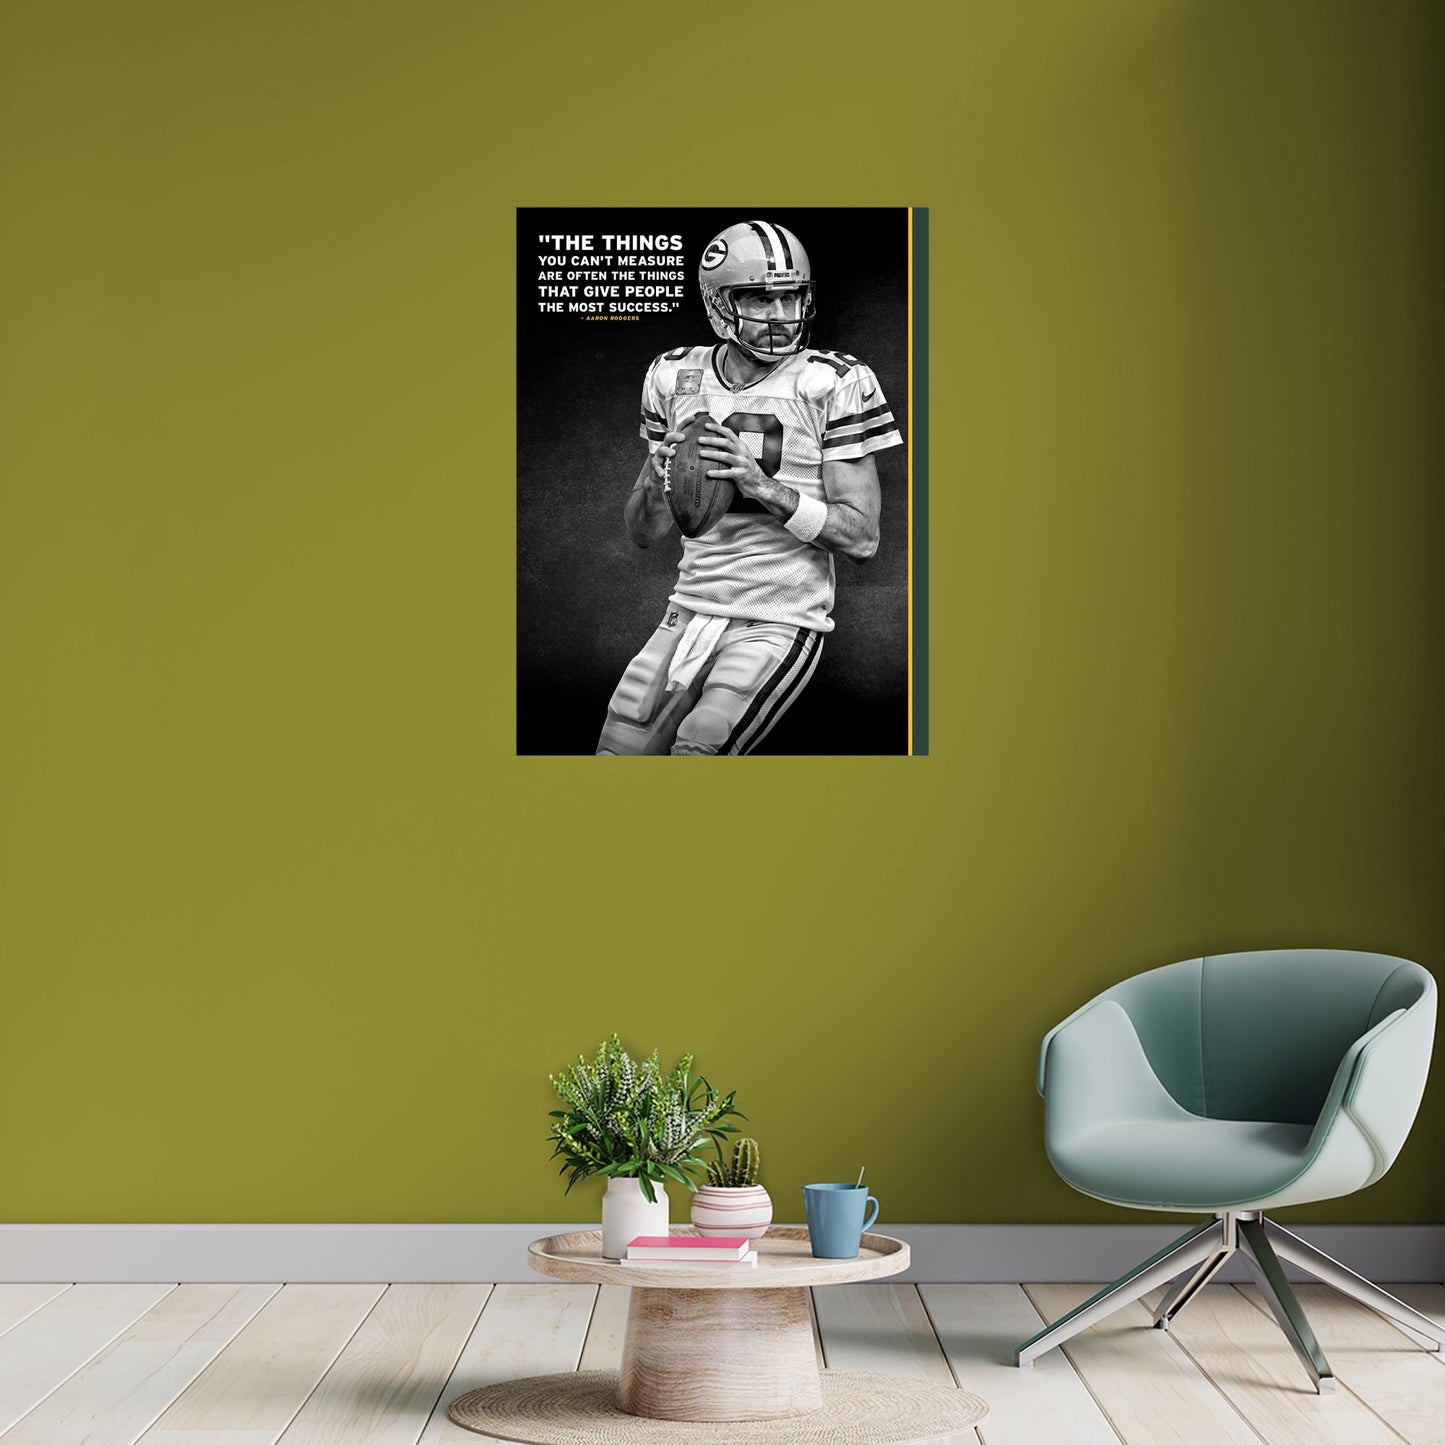 Green Bay Packers: Aaron Rodgers Inspirational Poster - Officially Licensed NFL Removable Adhesive Decal